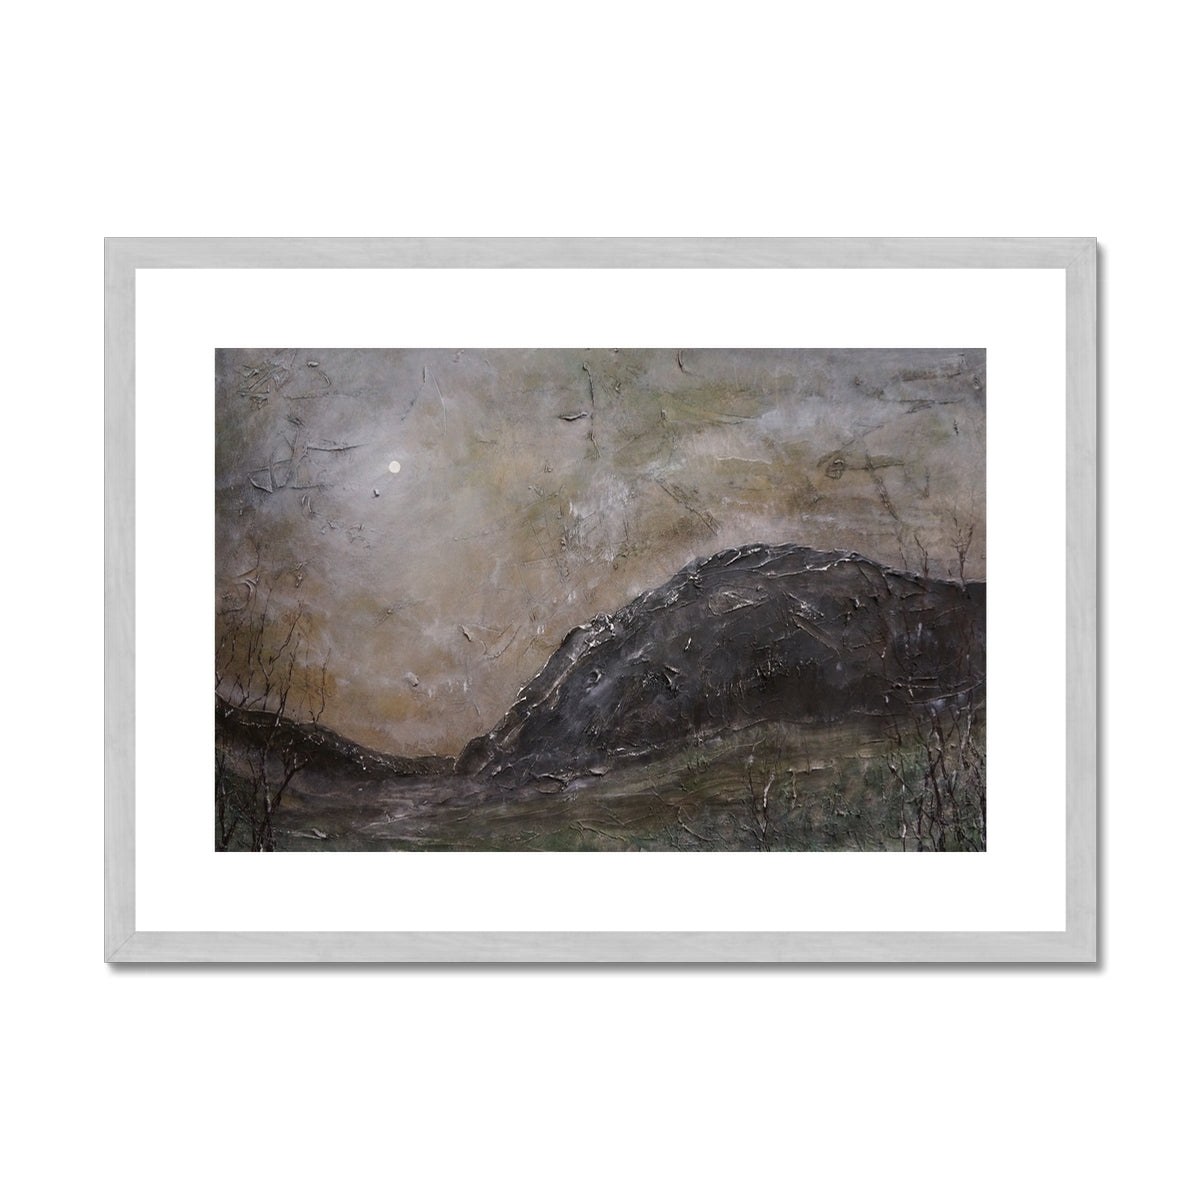 Glen Nevis Moonlight Painting | Antique Framed & Mounted Prints From Scotland-Antique Framed & Mounted Prints-Scottish Lochs & Mountains Art Gallery-A2 Landscape-Silver Frame-Paintings, Prints, Homeware, Art Gifts From Scotland By Scottish Artist Kevin Hunter